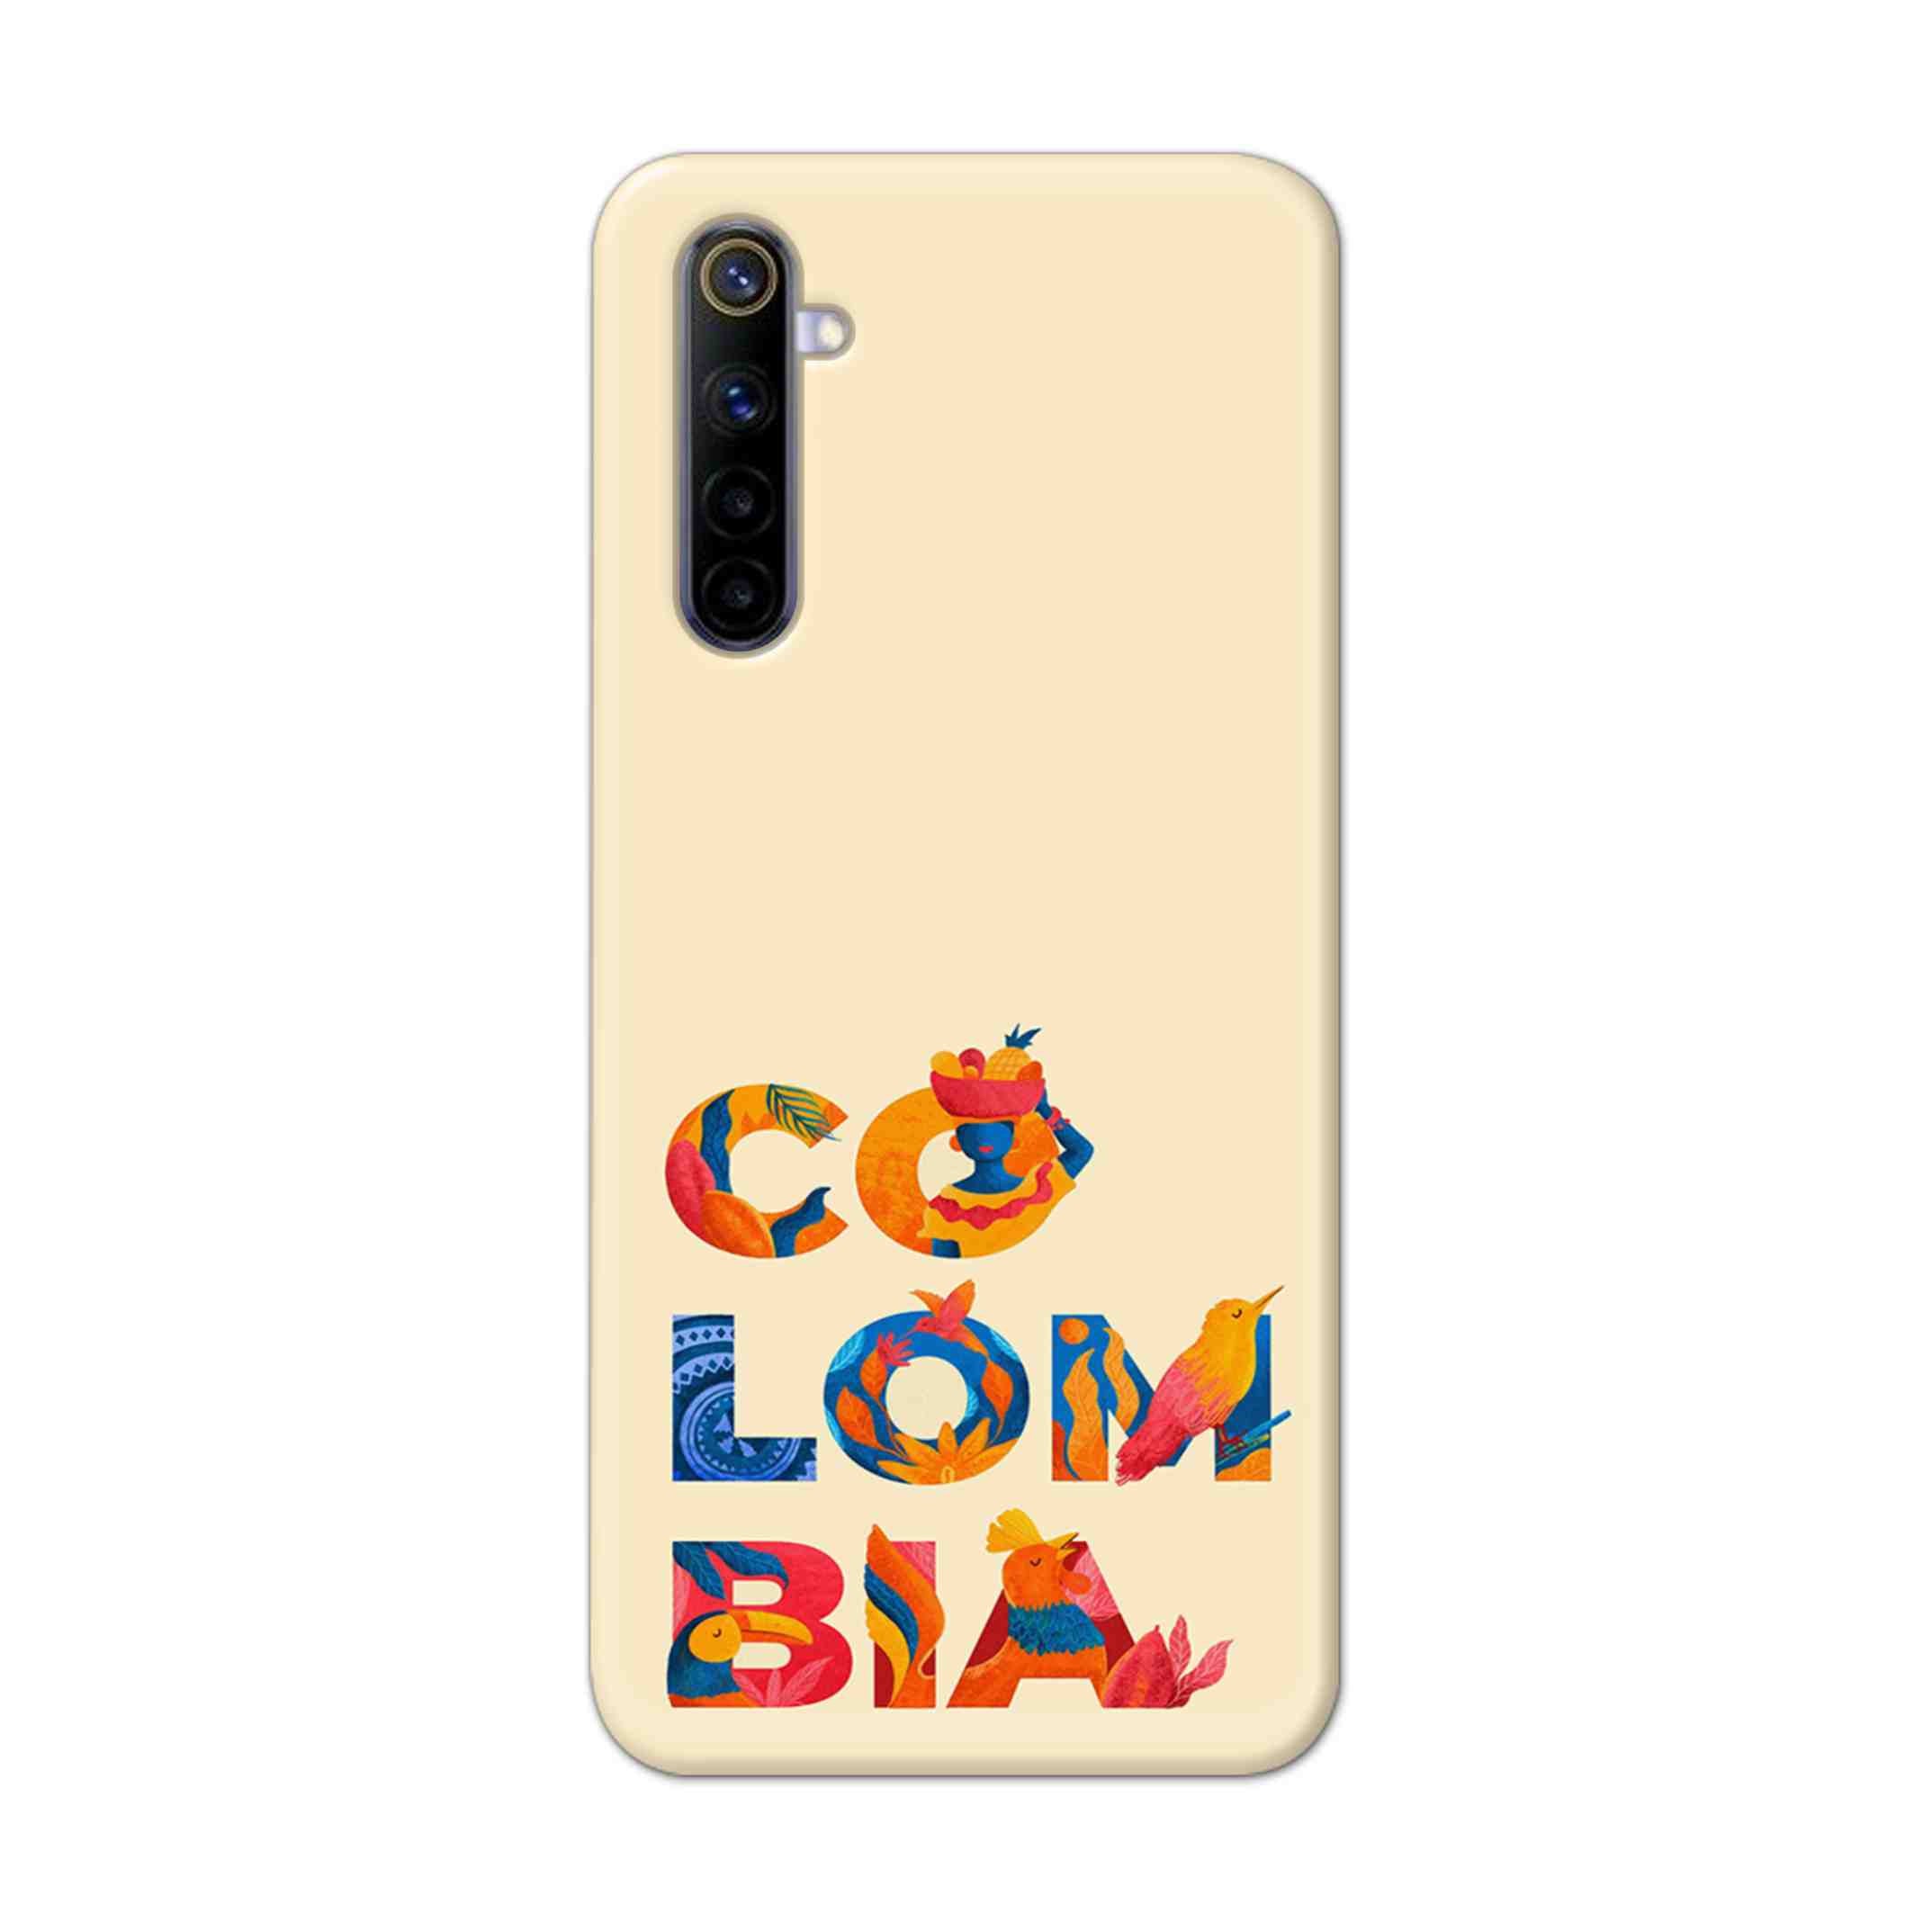 Buy Colombia Hard Back Mobile Phone Case Cover For REALME 6 Online